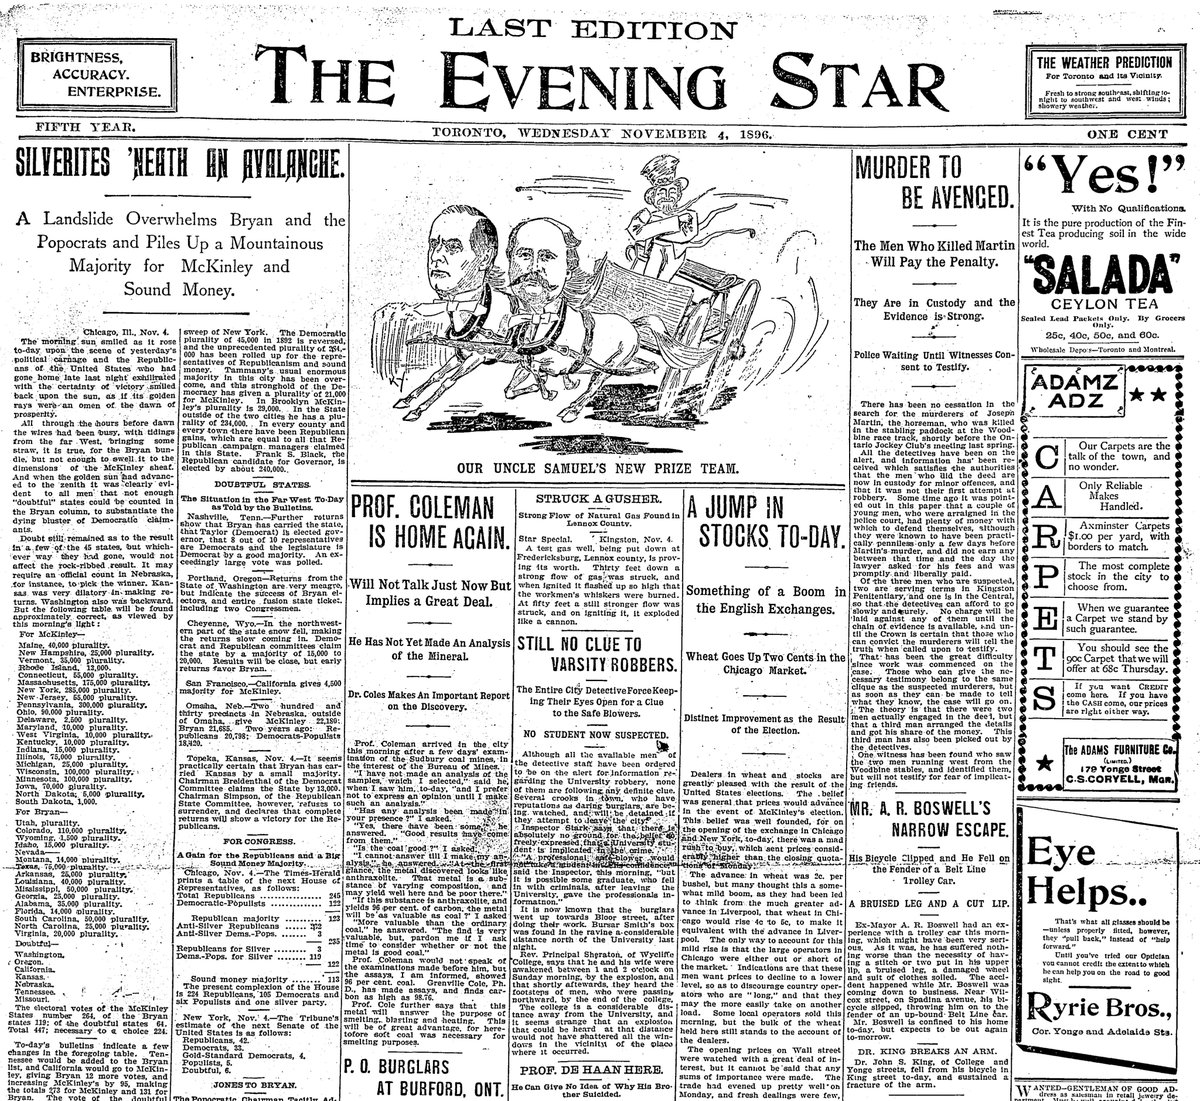 1896: “A Mountainous Majority for McKinley," proclaims what was then the Evening Star, founded four years earlier by printers on strike from another paper. “Silverites” in the headline is a reference to the monetary debate that dominated the campaign. The paper cost one cent.